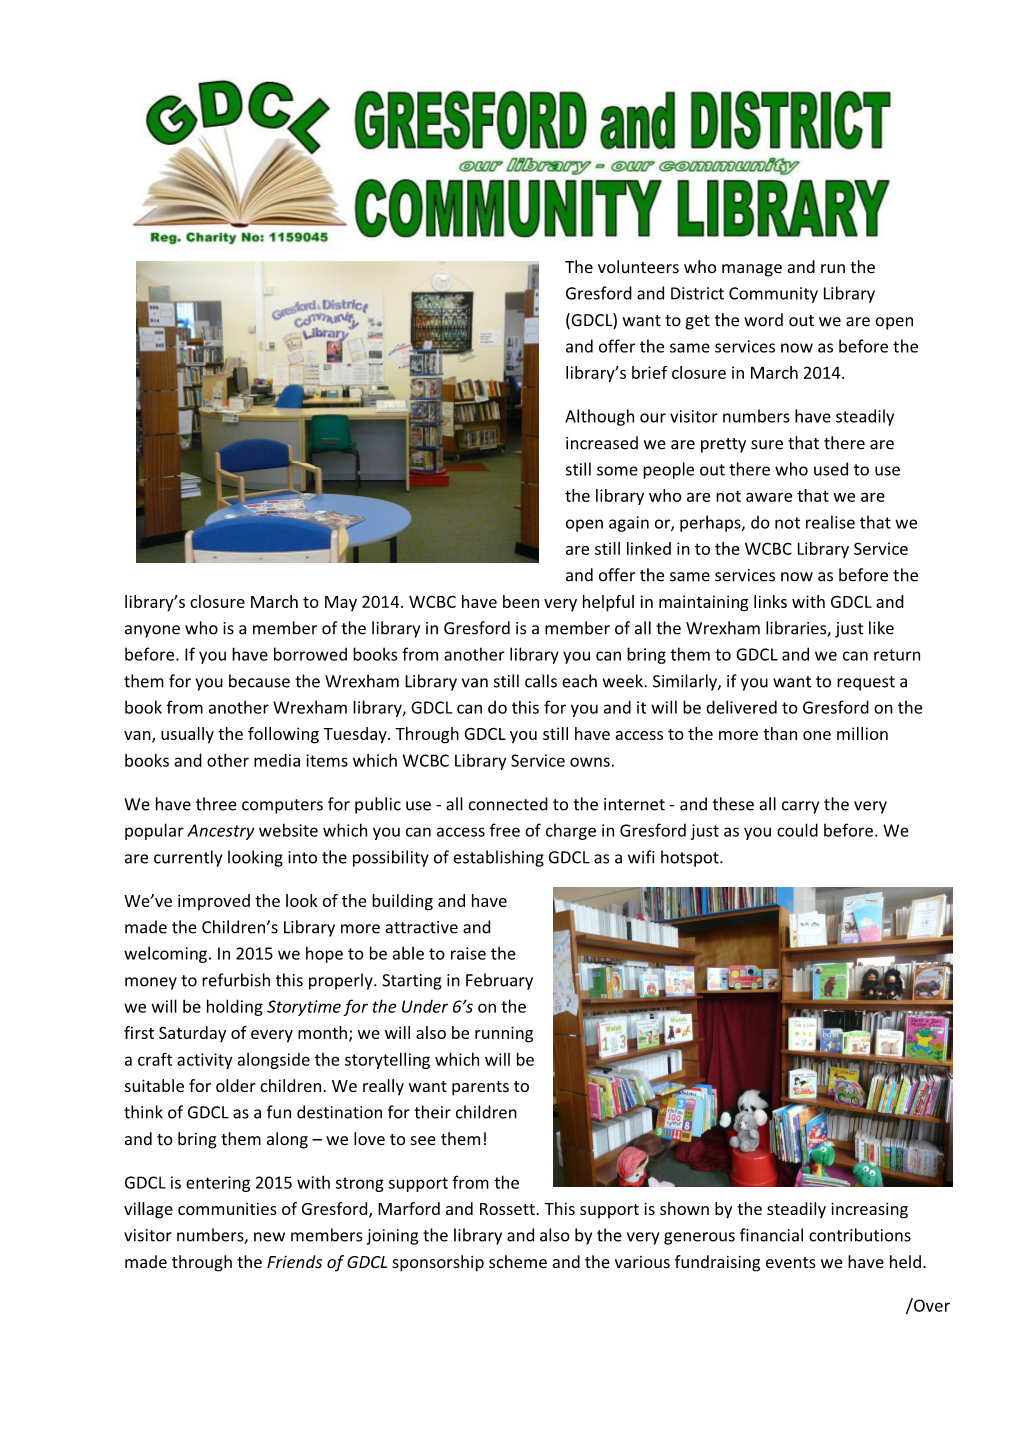 Gresford Community Library (Gdcl)